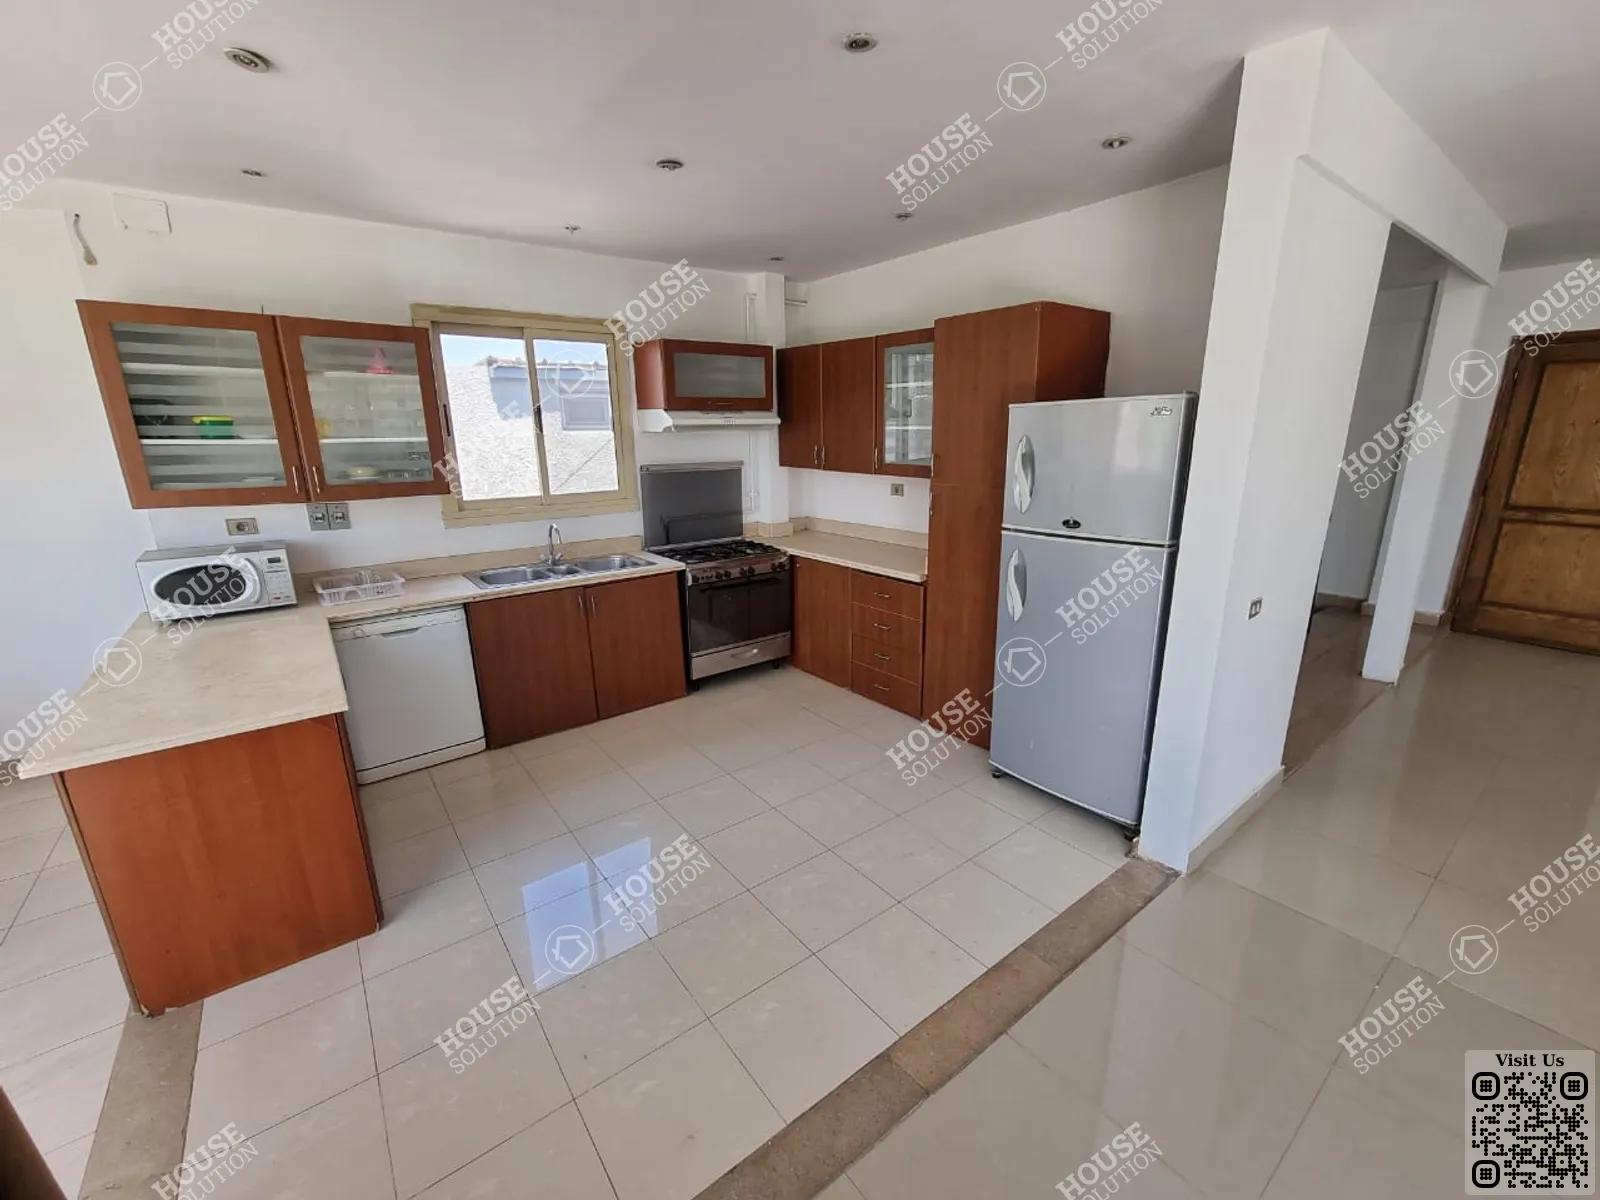 KITCHEN  @ Penthouses For Rent In Maadi Maadi Sarayat Area: 300 m² consists of 4 Bedrooms 4 Bathrooms Modern furnished 5 stars #2920-1